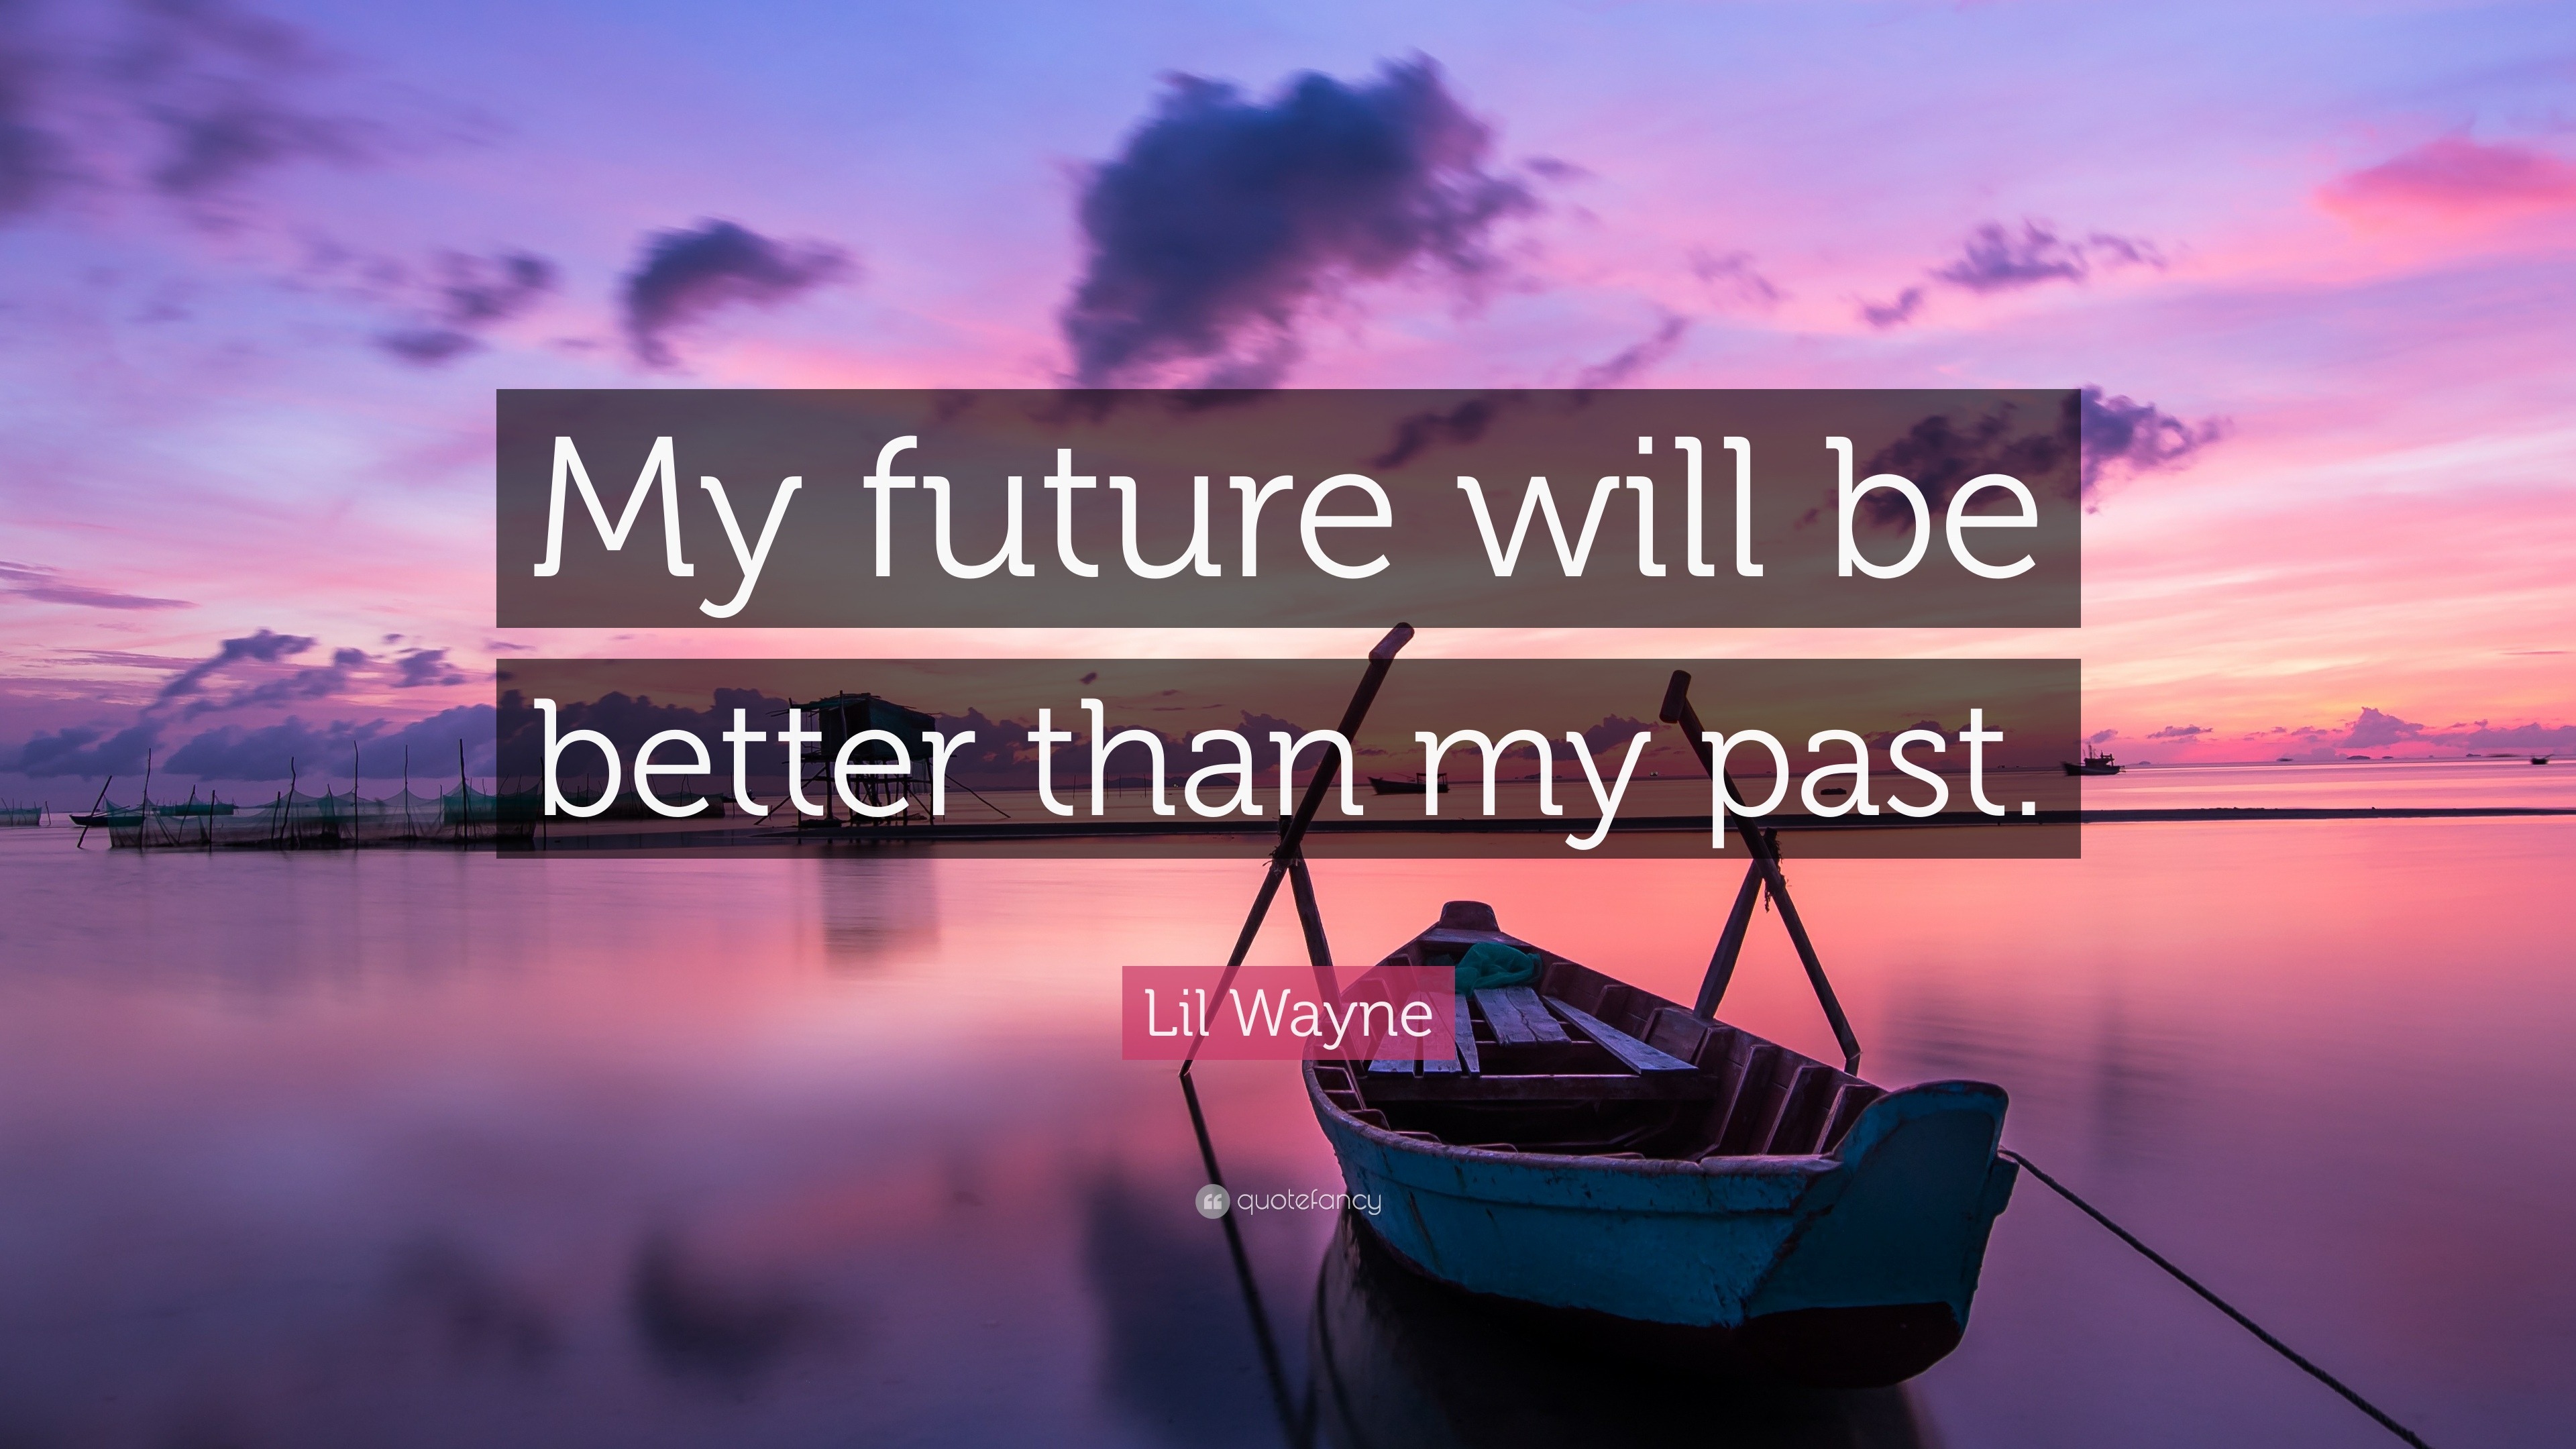 Lil Wayne Quote: "My future will be better than my past."